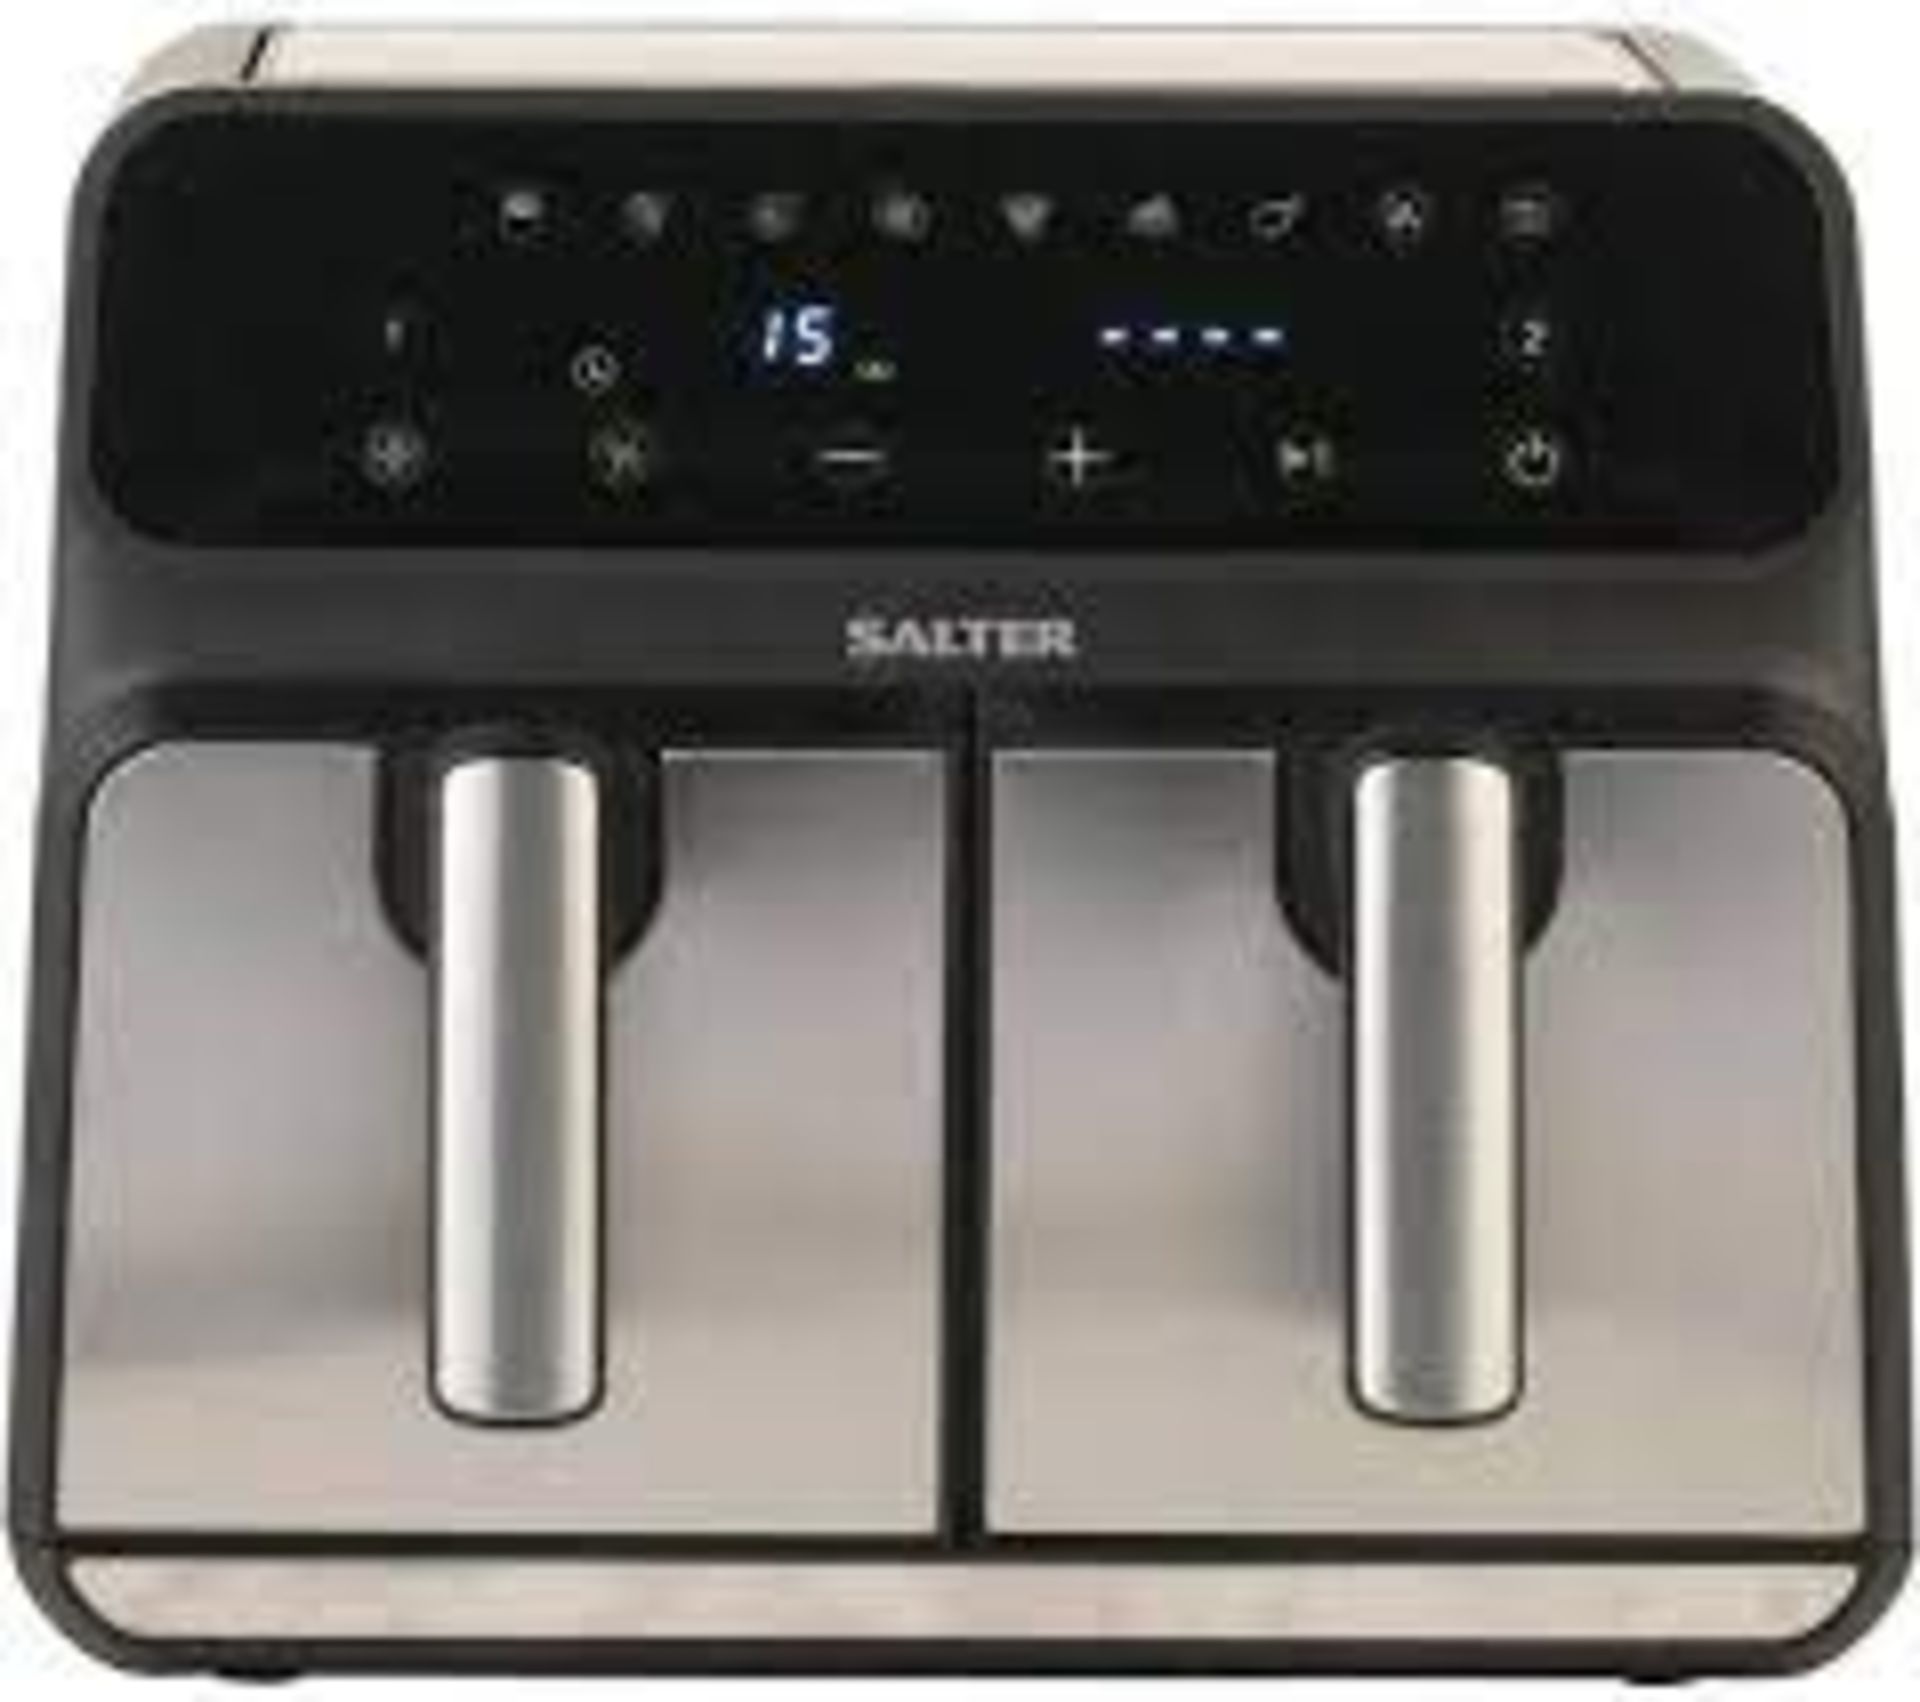 SALTER 5196 7.4L Dual Air Fryer Pro - Black & Stainless Steel. - ER48. Air fry, roast and grill